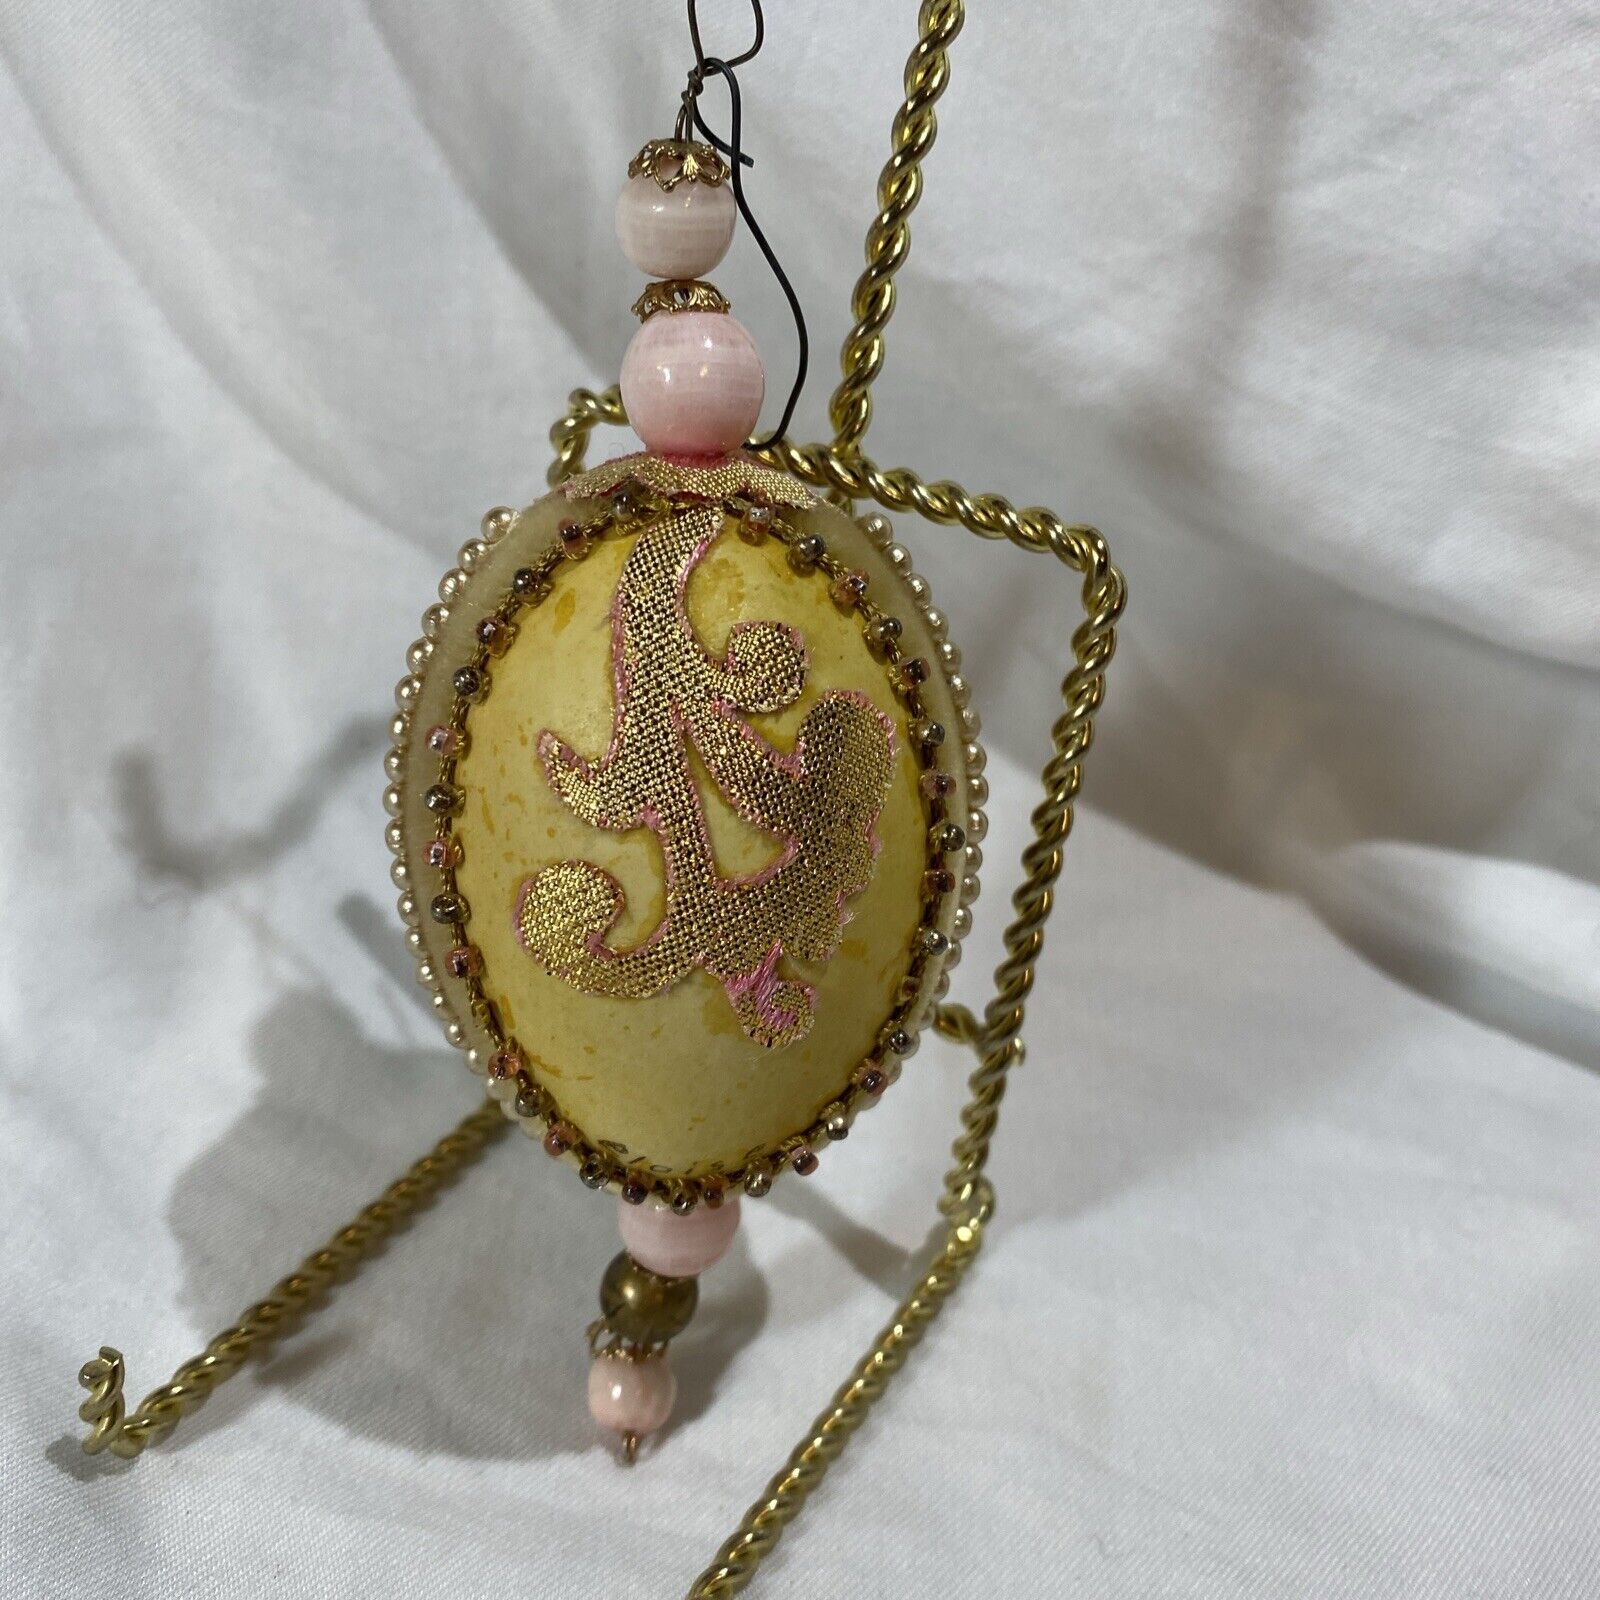 Highly Decorated Handmade Gold & Pink Signed  Egg Shaped Ornament